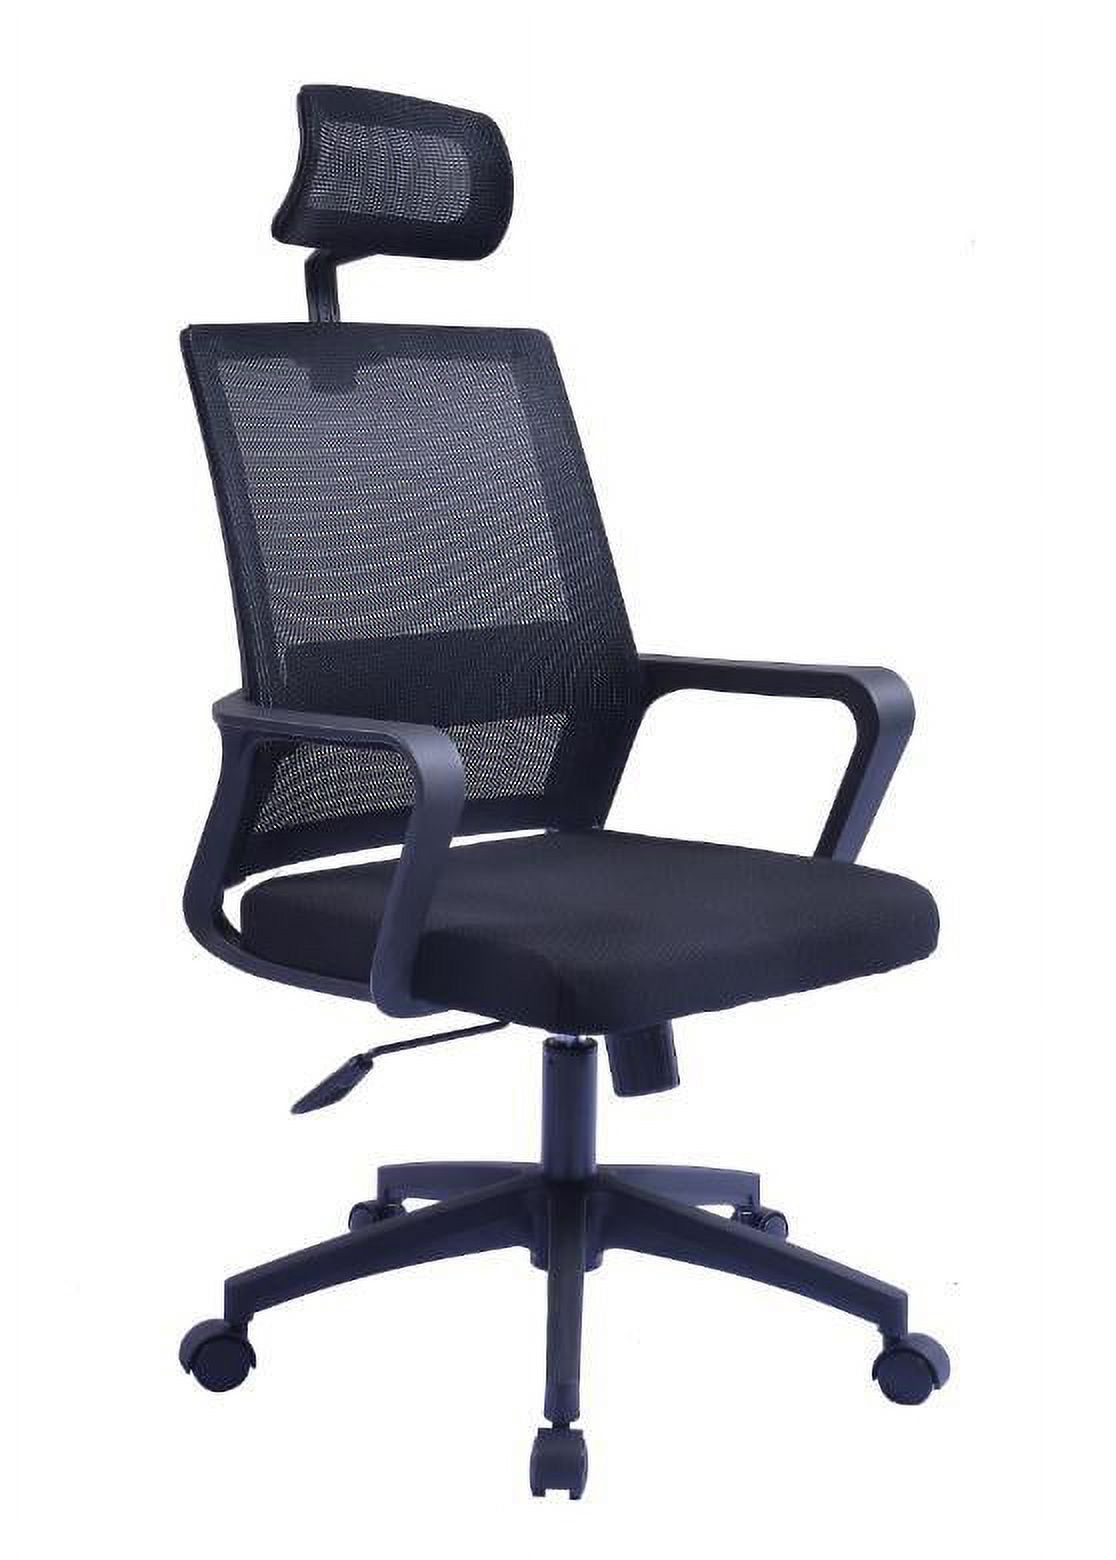 Ergonomic Mesh Office Chair, High Back Desk Chair - Adjustable Headrest and Height, Fixed Armrest -  Tilt Function, Comfortable Back Support and Roller Wheels, Swivel Computer Task Chair - image 1 of 5